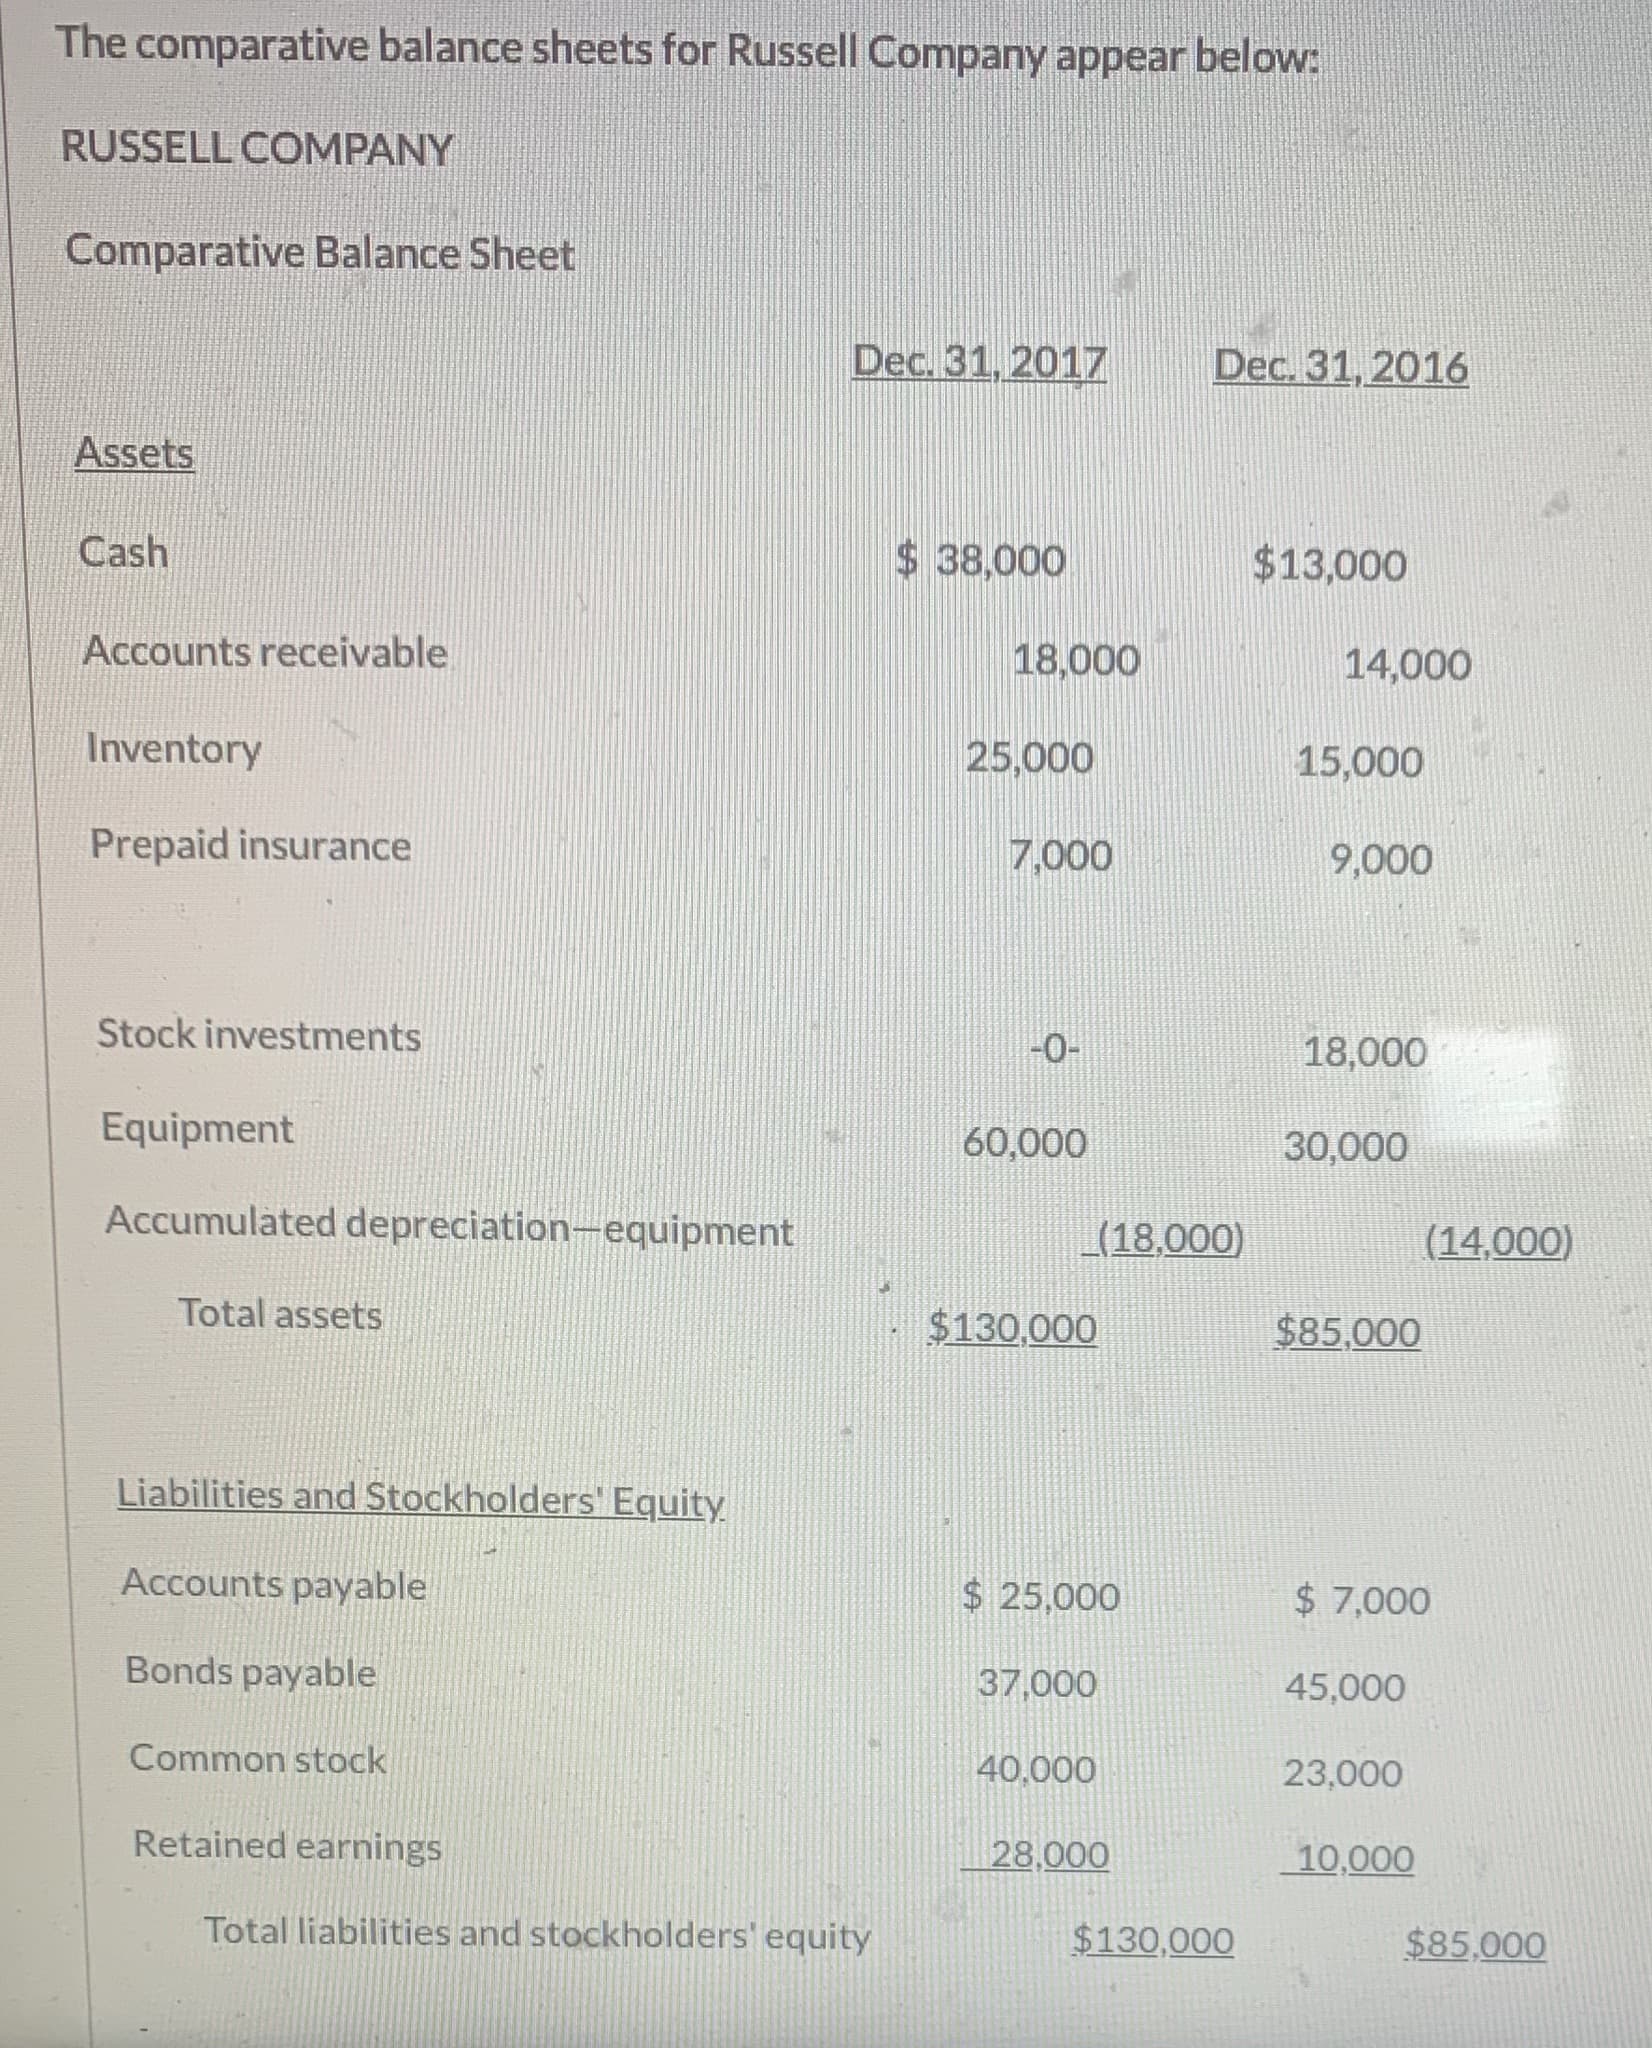 The comparative balance sheets for Russell Company appear below:
RUSSELL COMPANY
Comparative Balance Sheet
Dec. 31, 2017
Dec. 31, 2016
Assets
Cash
$ 38,000
$13,000
Accounts receivable
18,000
14,000
Inventory
25,000
15,000
